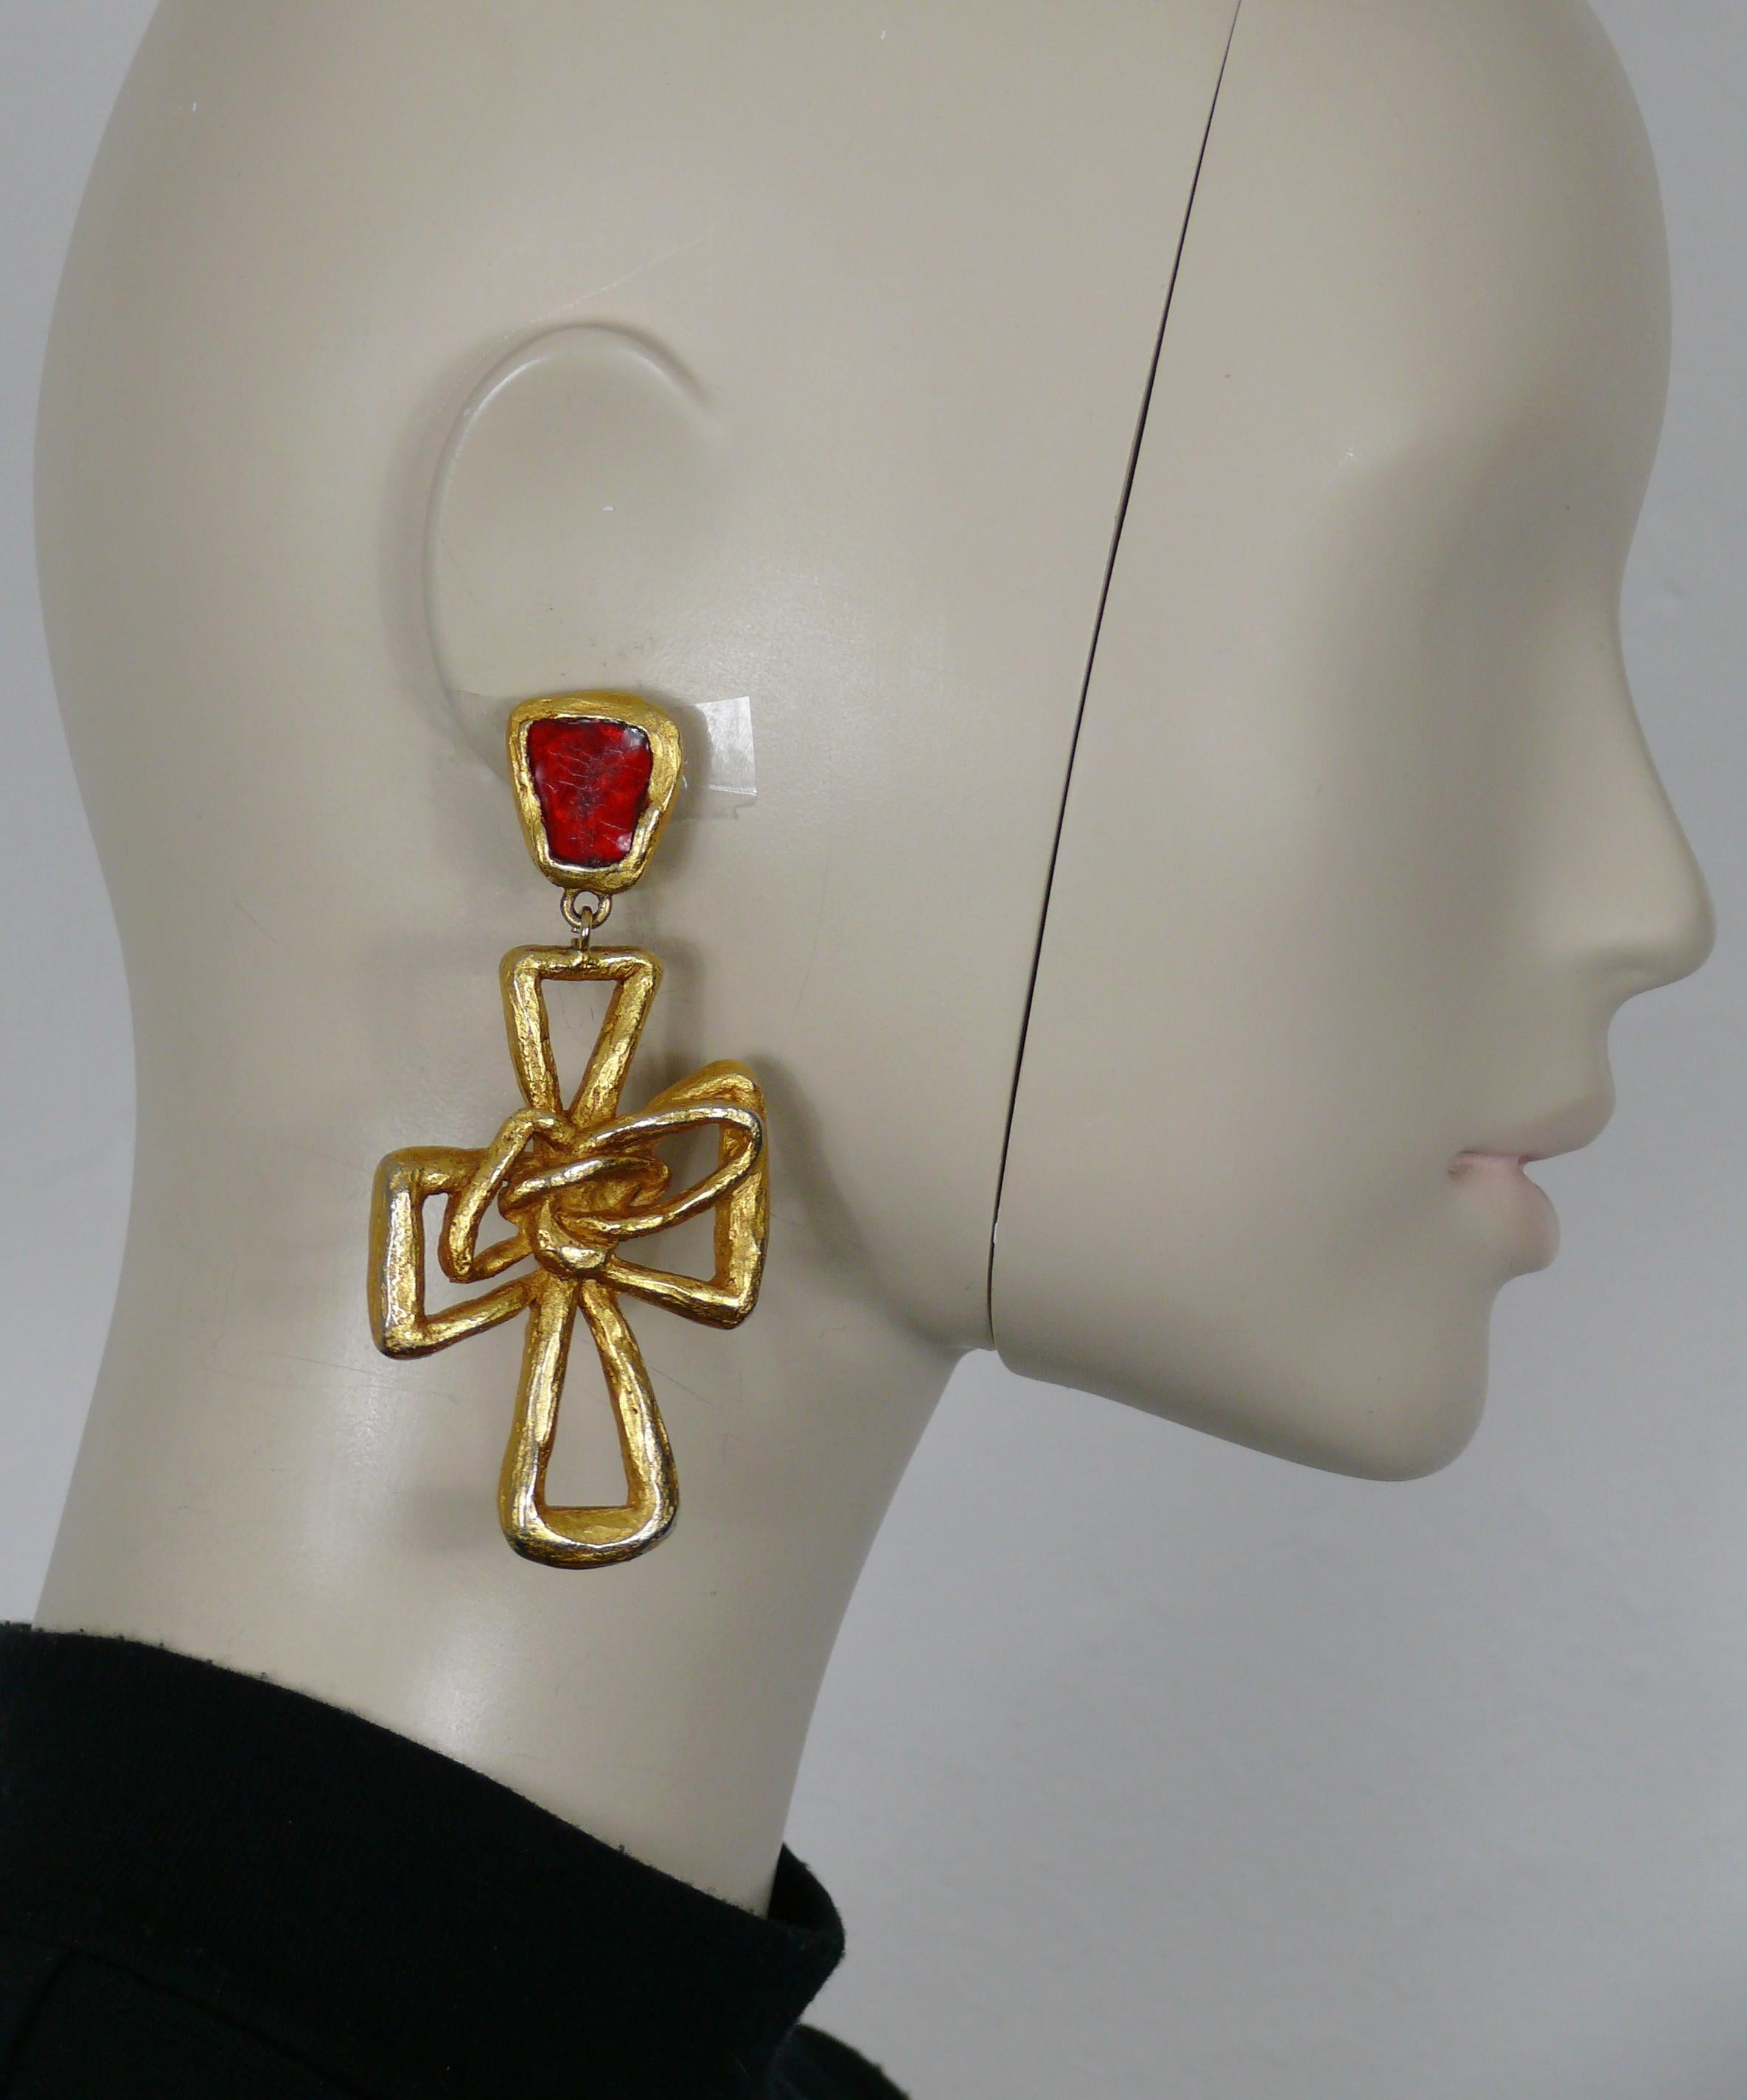 CHRISTIAN LACROIX vintage gold tone cross dangling earrings (clip-on) featuring a red resin top.

Marked CHRISTIAN LACROIX CL Made in France.

Indicative measurements : max. height approx. 9.4 cm (3.70 inches) / max. width approx. 4.5 cm (1.77